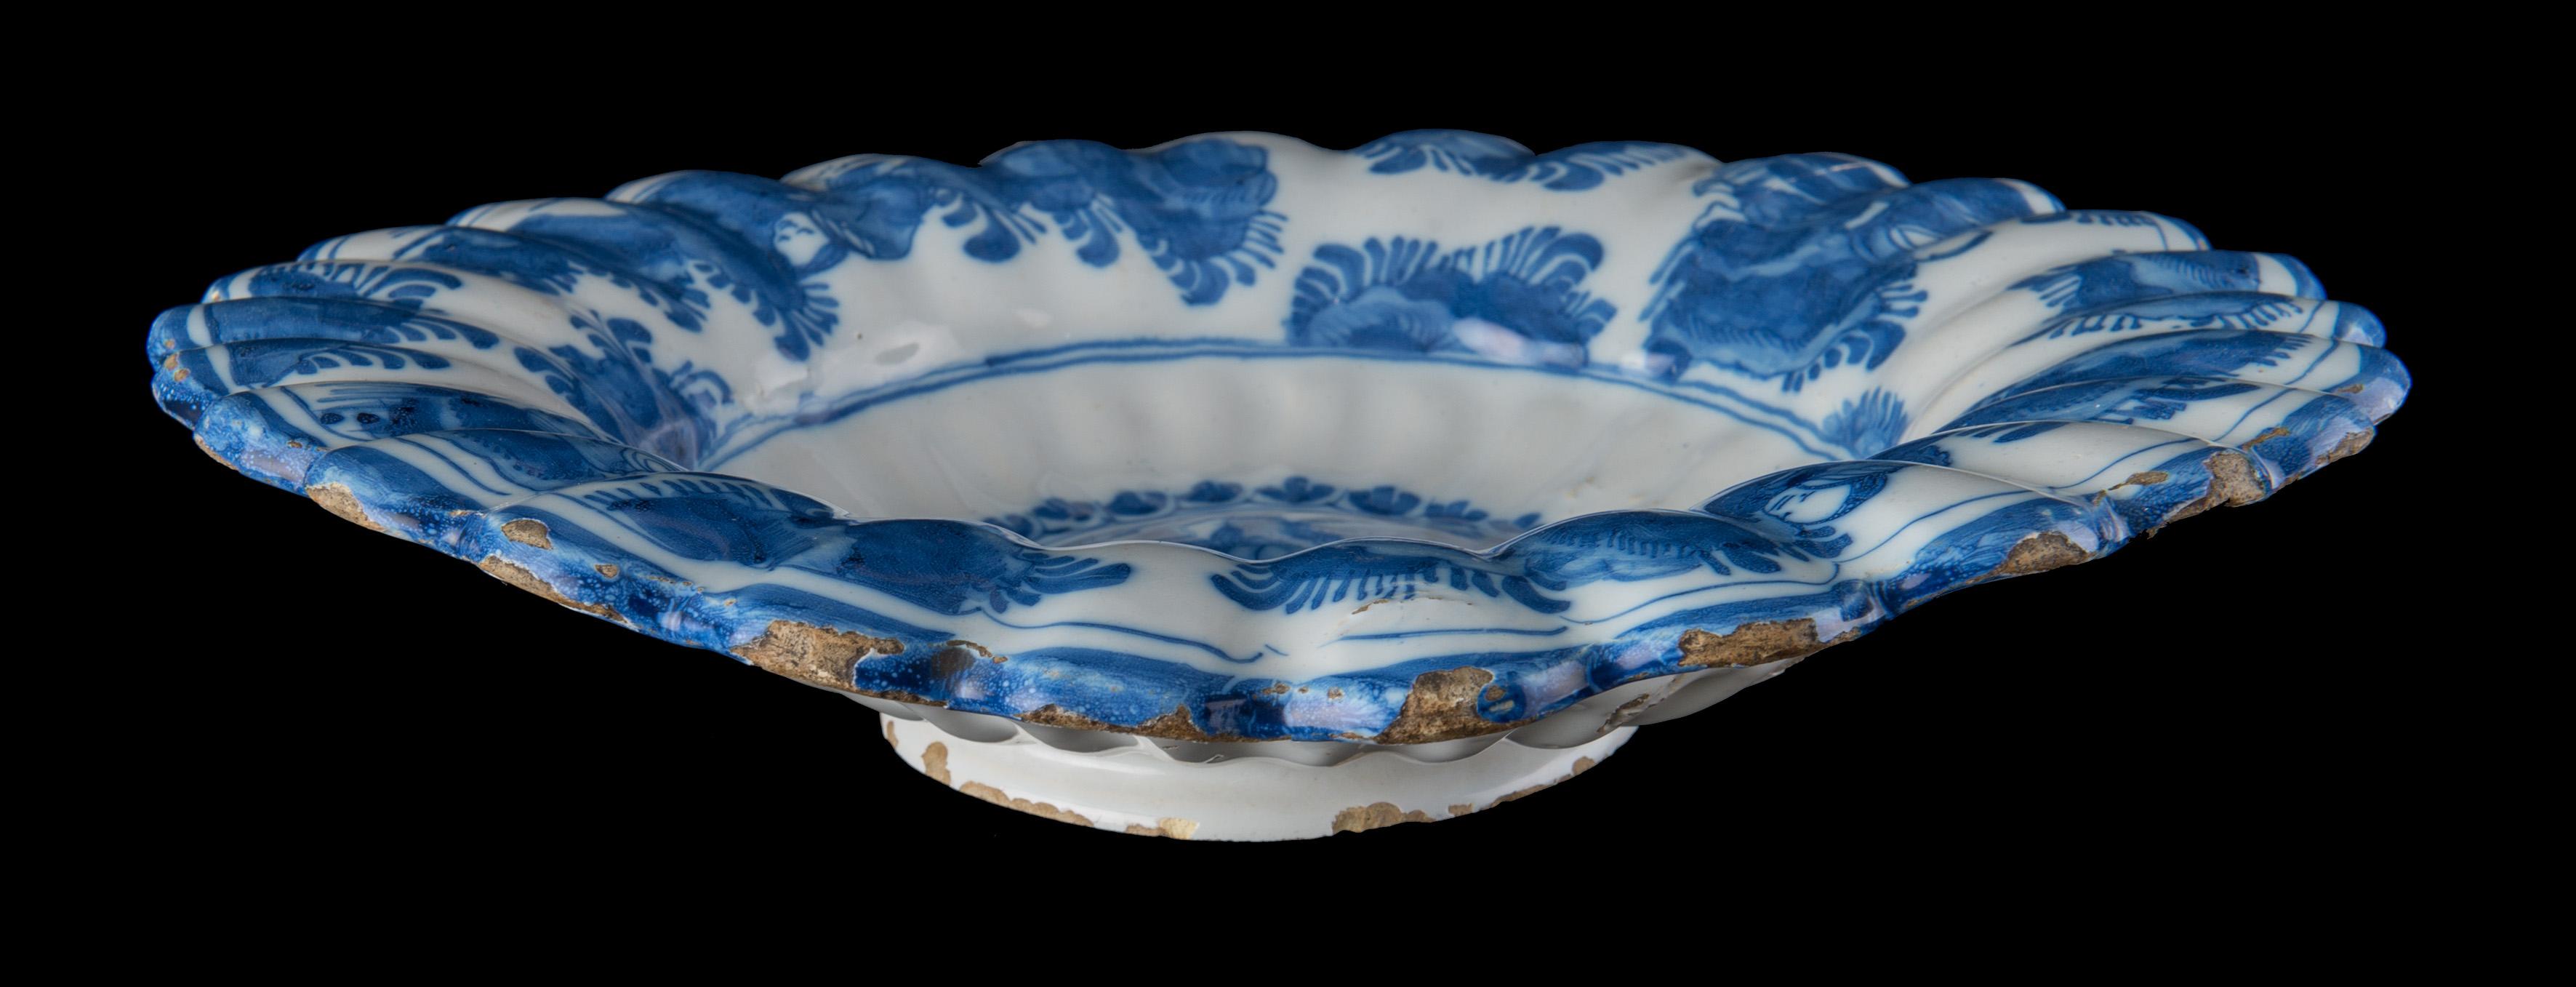 Blue and White Chinoiserie Lobed Dish, Delft, 1650-1680 For Sale 2